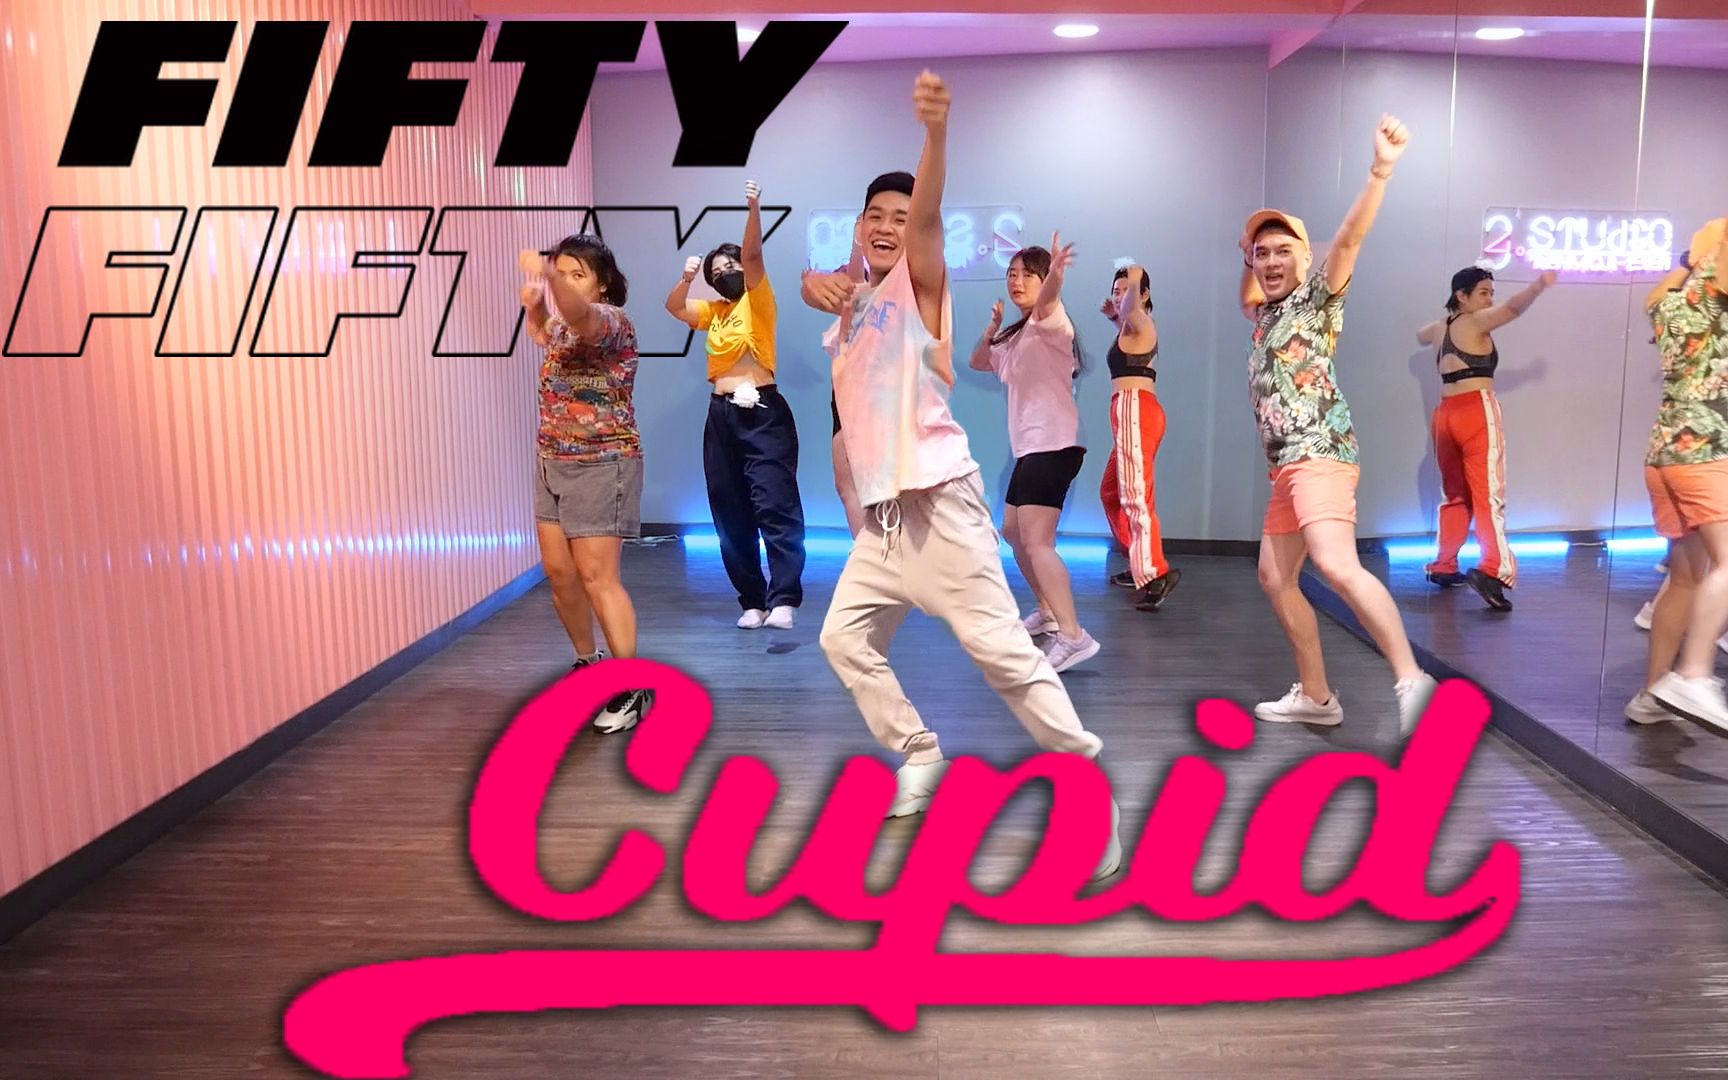 [KPOP] FIFTY FIFTY - Cupid | Golfy | Dance Fitness / Dance Workout